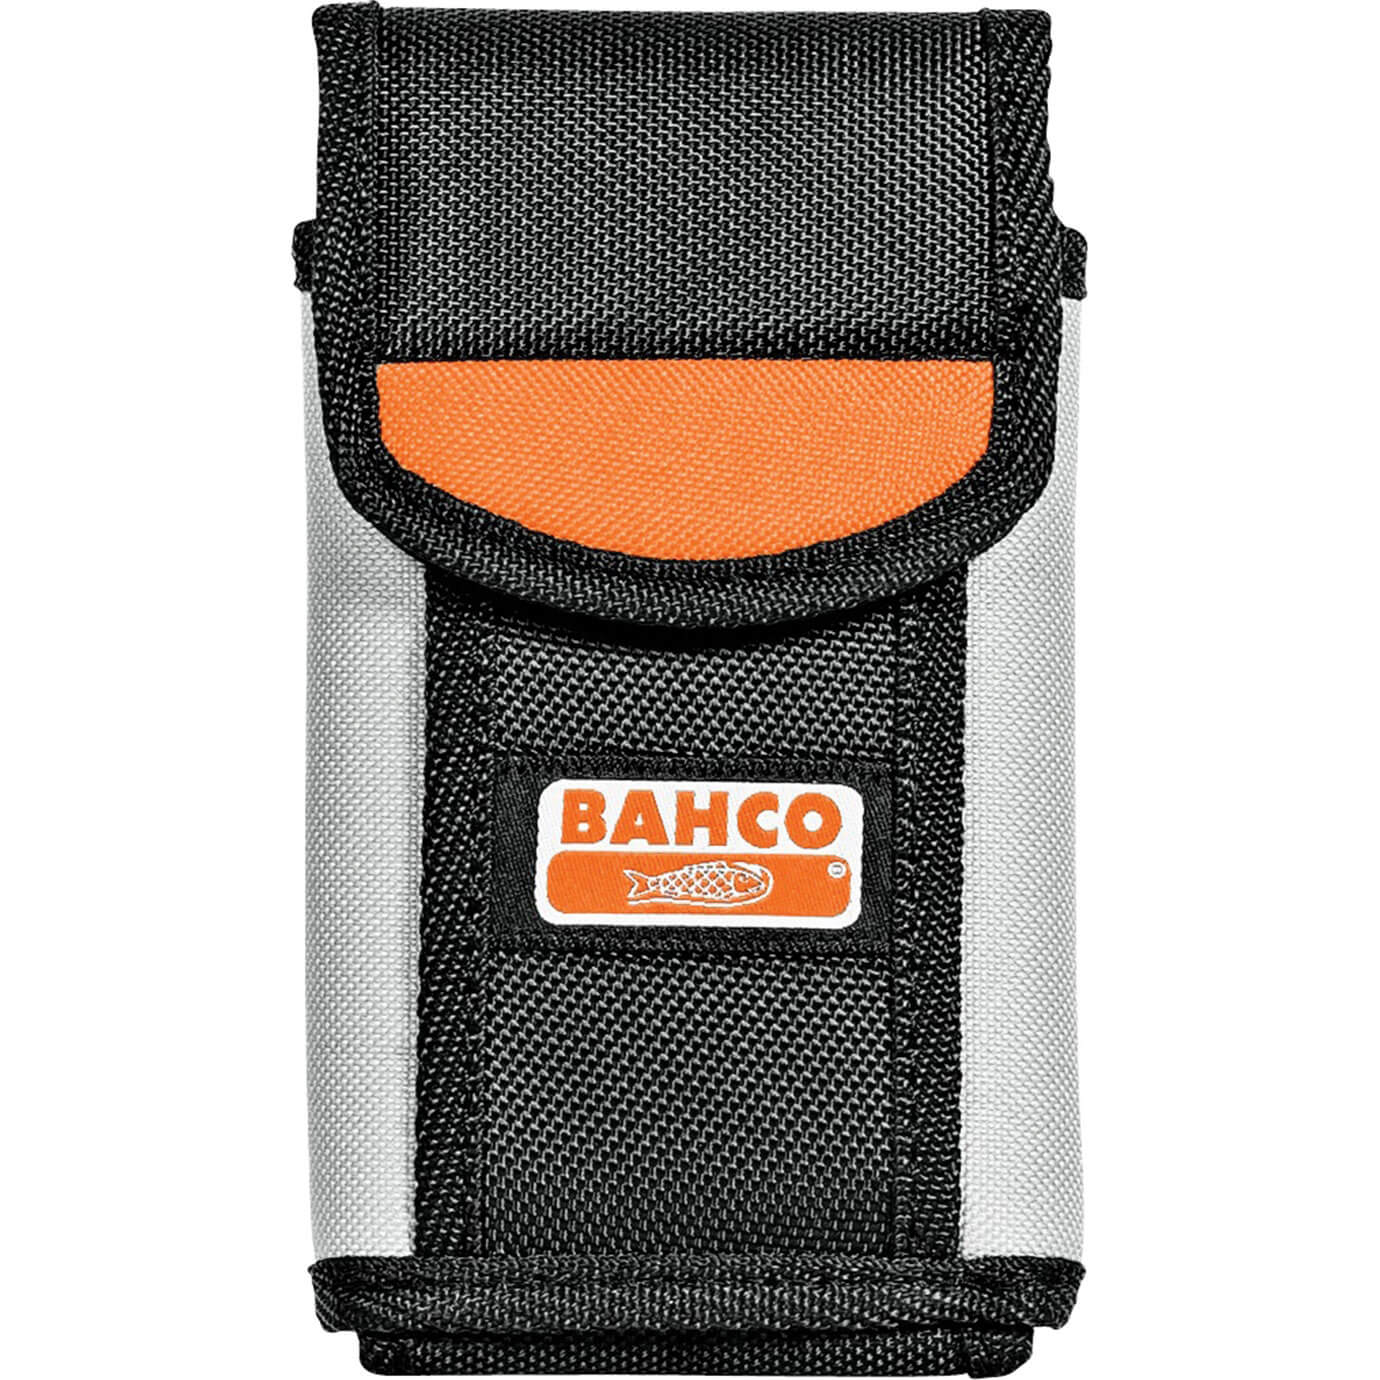 Photo of Bahco Mobile Phone Holder